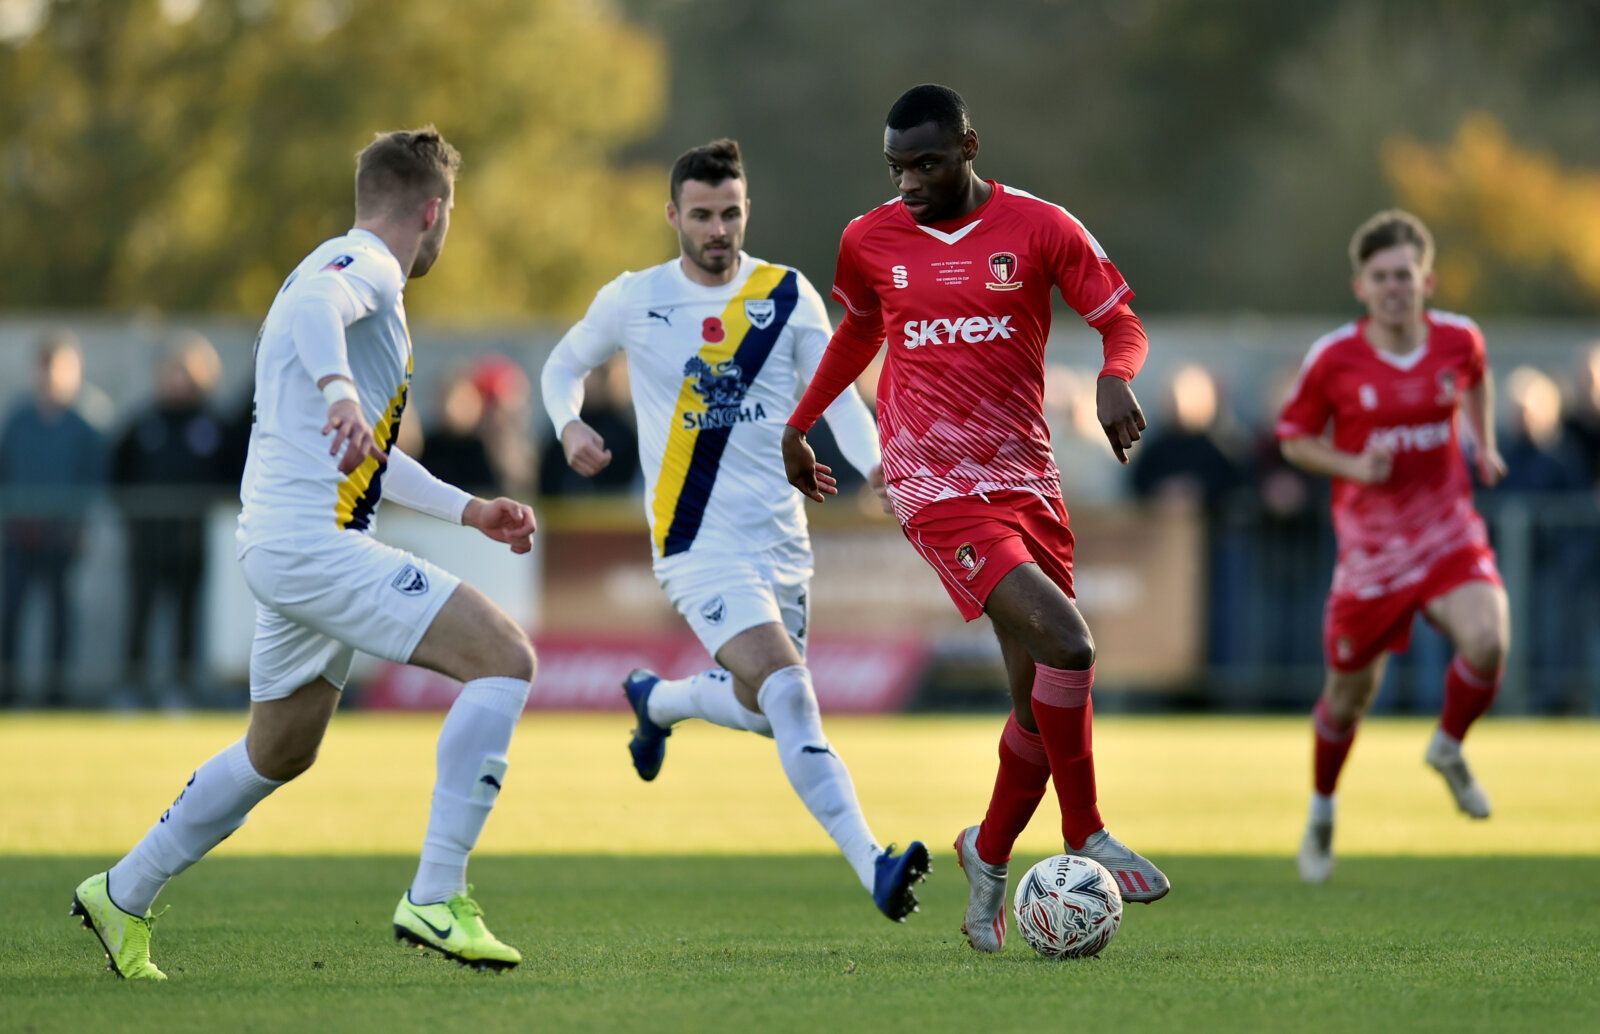 Soccer Football - FA Cup - First Round - Hayes &amp; Yeading United v Oxford United - SKYEx Community Stadium, Hayes, Britain - November 10, 2019  Hayes and Yeading's Hassan Jalloh in action with Oxford United's Chris Cadden  Action Images/Adam Holt